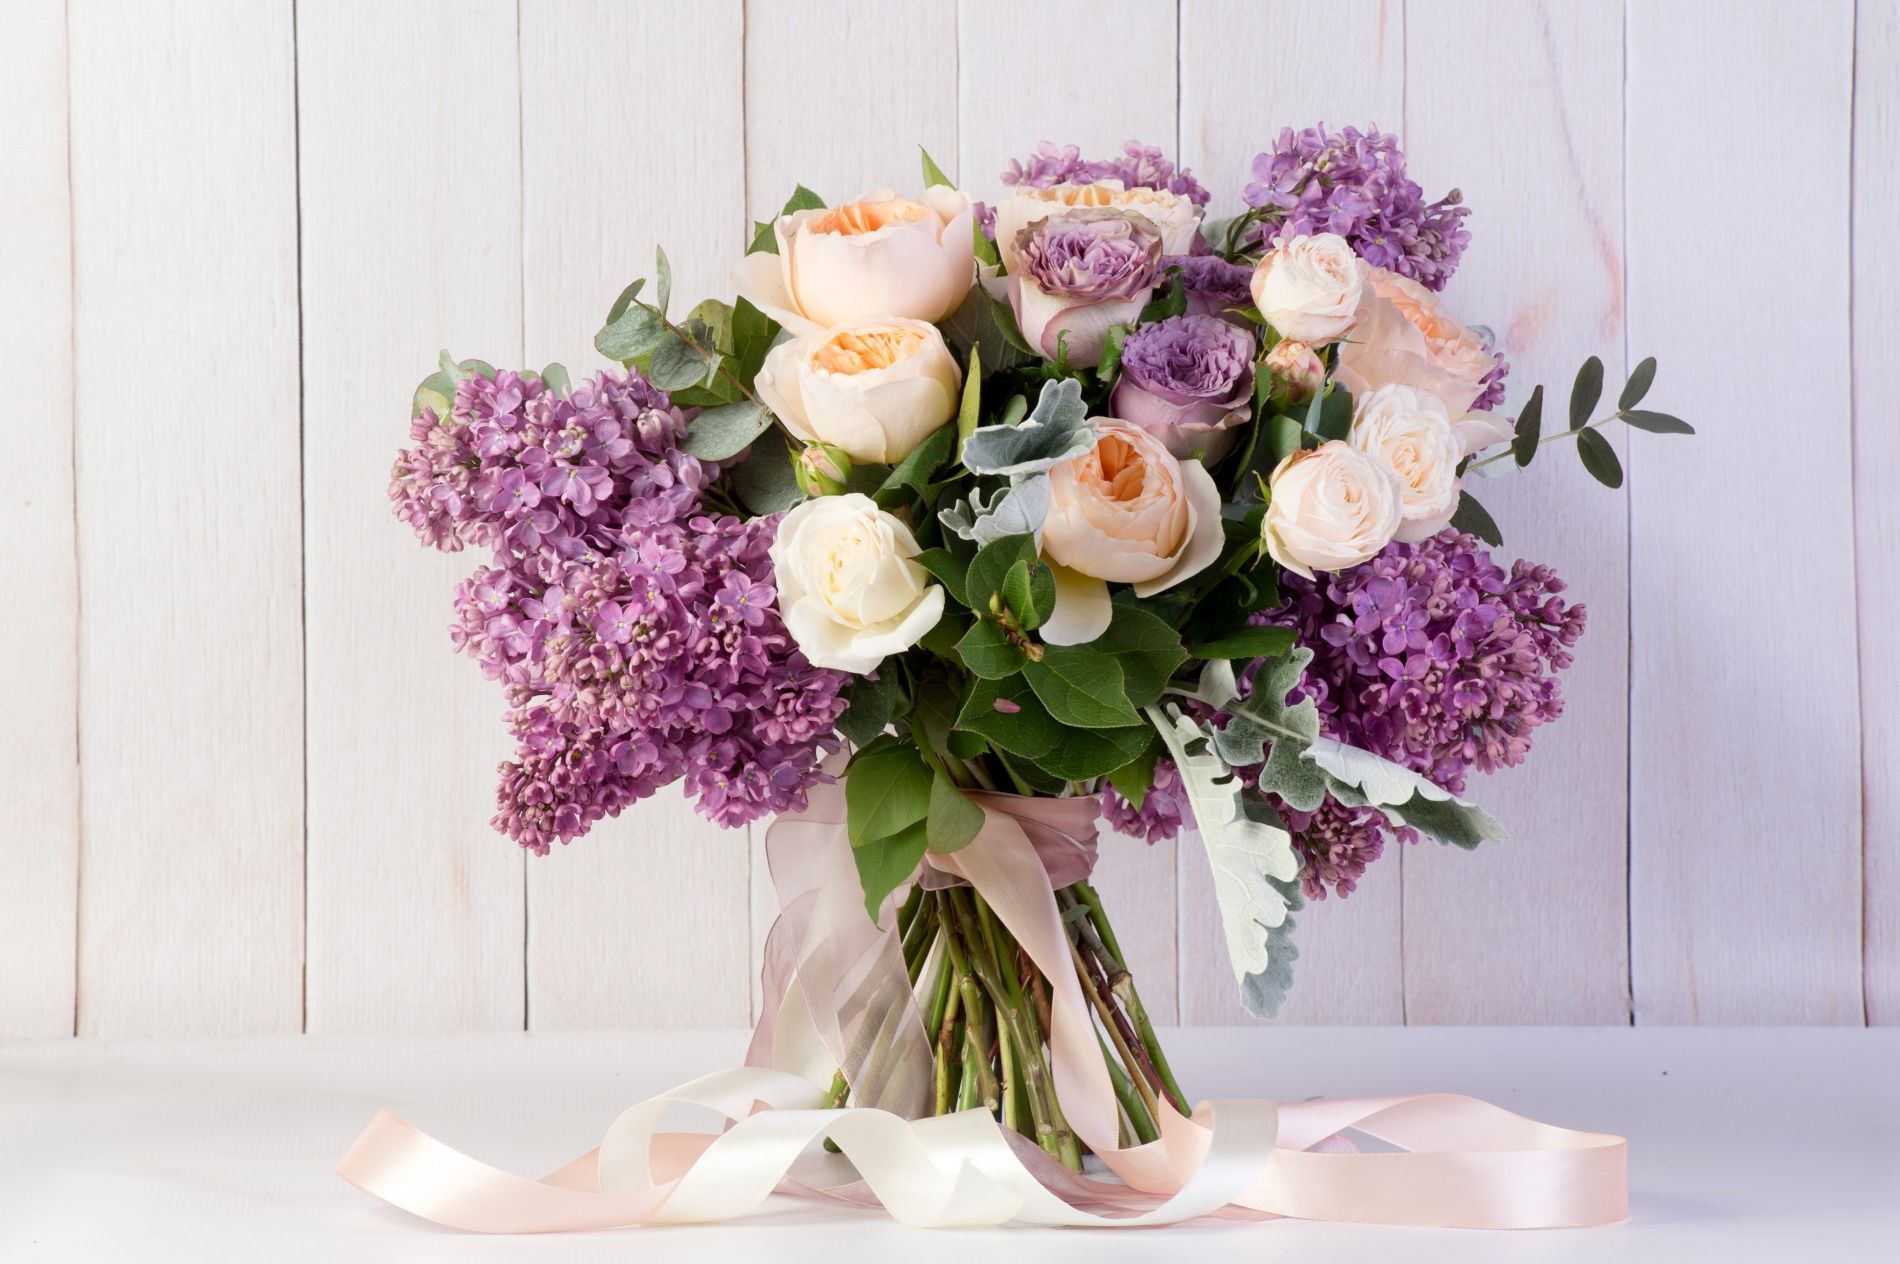 Bouquets_Roses_Lilac_517324_4061x2703.jpg